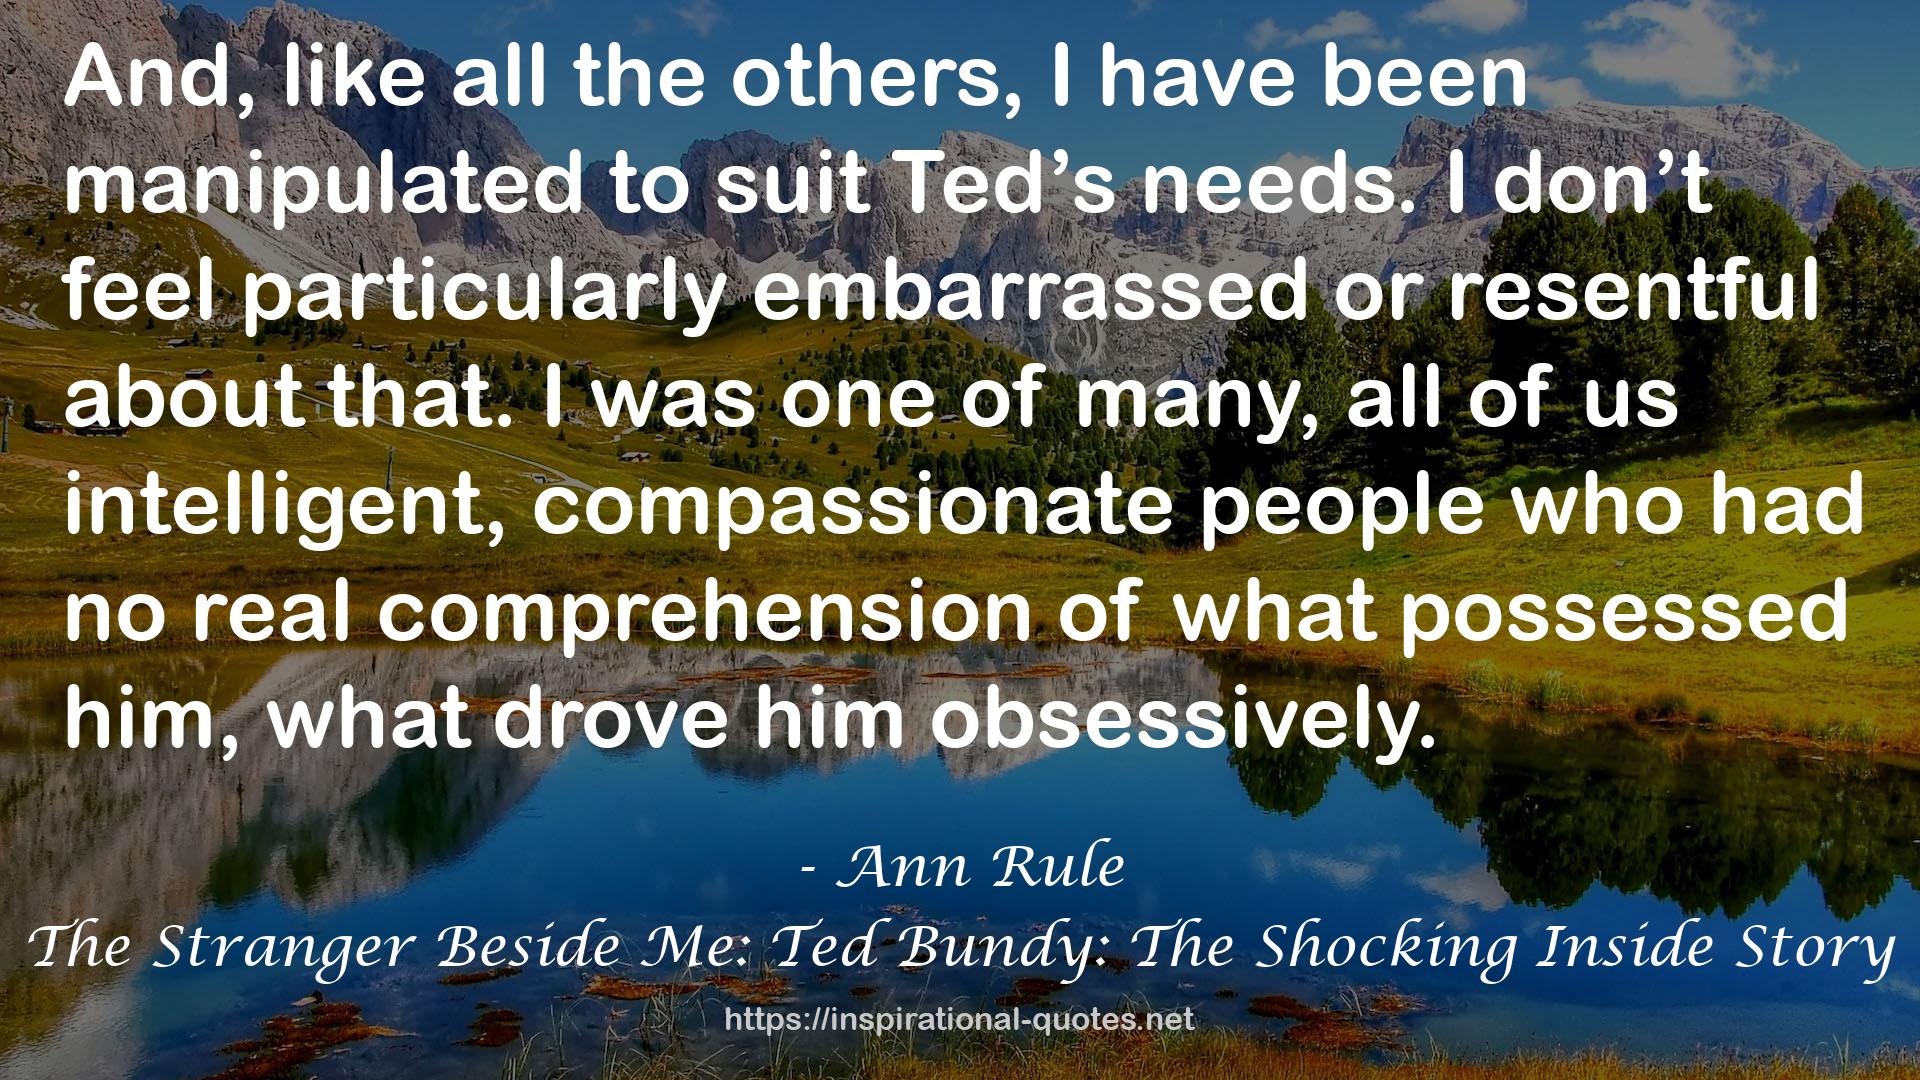 The Stranger Beside Me: Ted Bundy: The Shocking Inside Story QUOTES